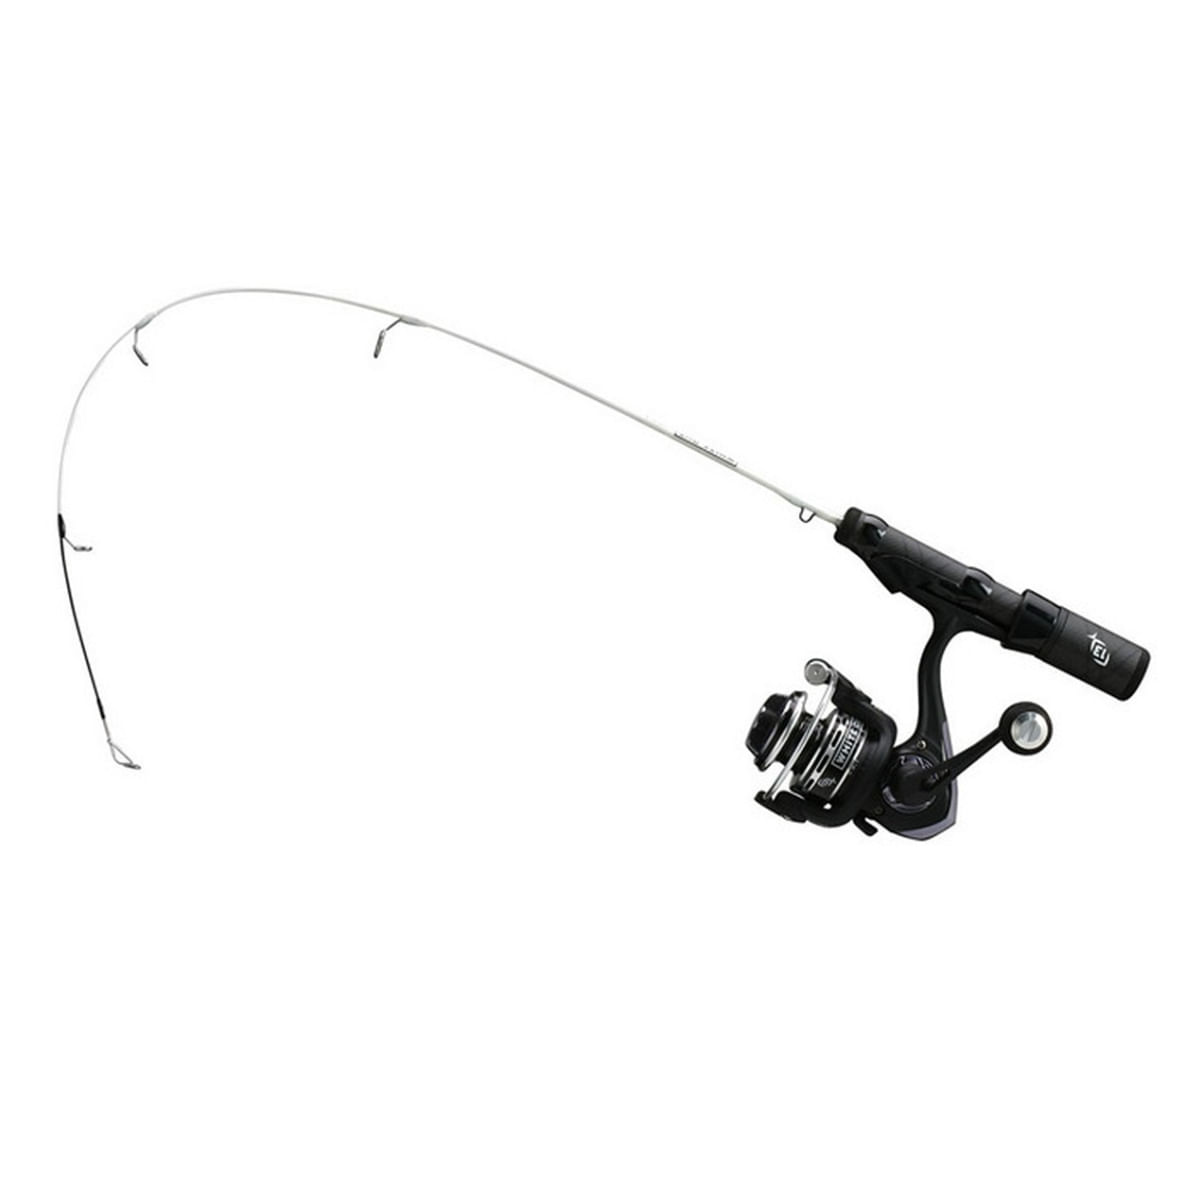 13 Fishing White Out Ice Fishing Combo - Als.com